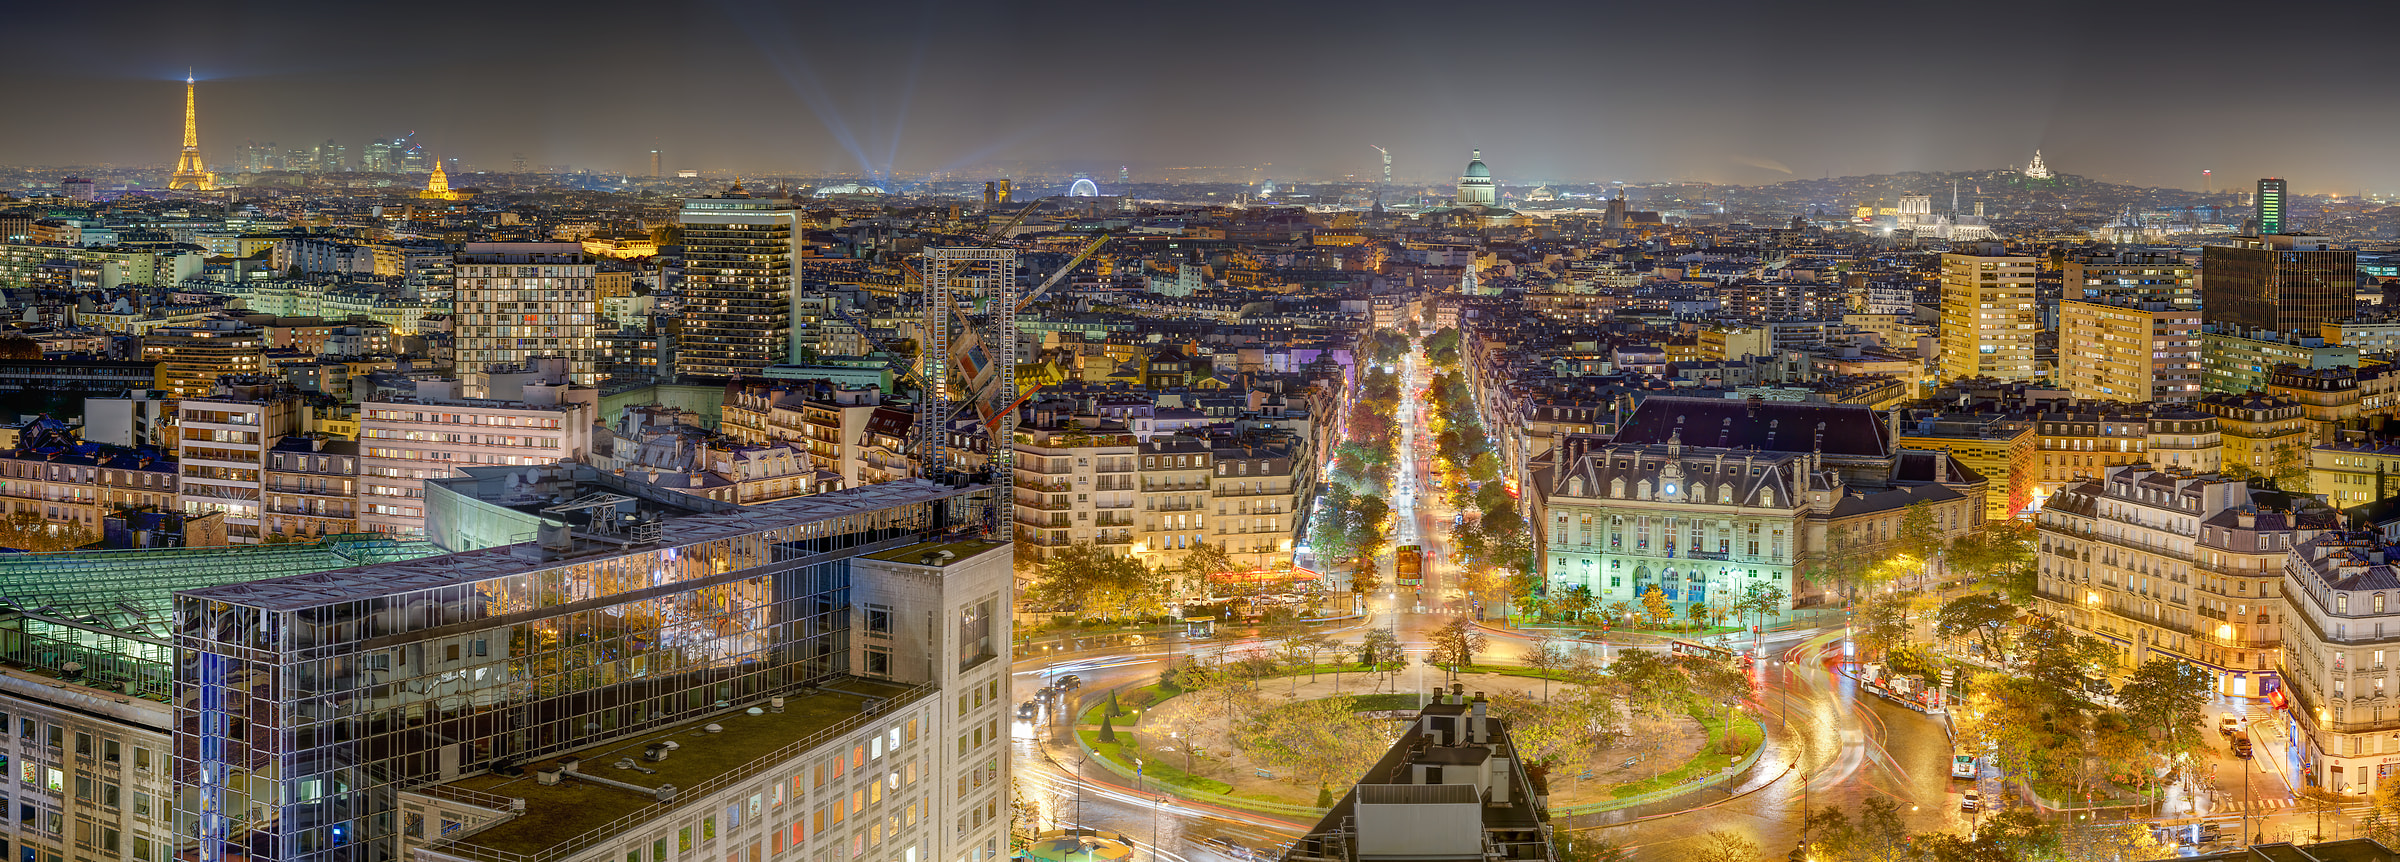 440 megapixels! A very high resolution, large-format VAST photo print of the Paris skyline at night with many famous French landmarks including the Eiffel Tower, Notre Dame, Sacré-Cœur; cityscape photograph created by Tim Lo Monaco in Place D'Italie, Paris, France.